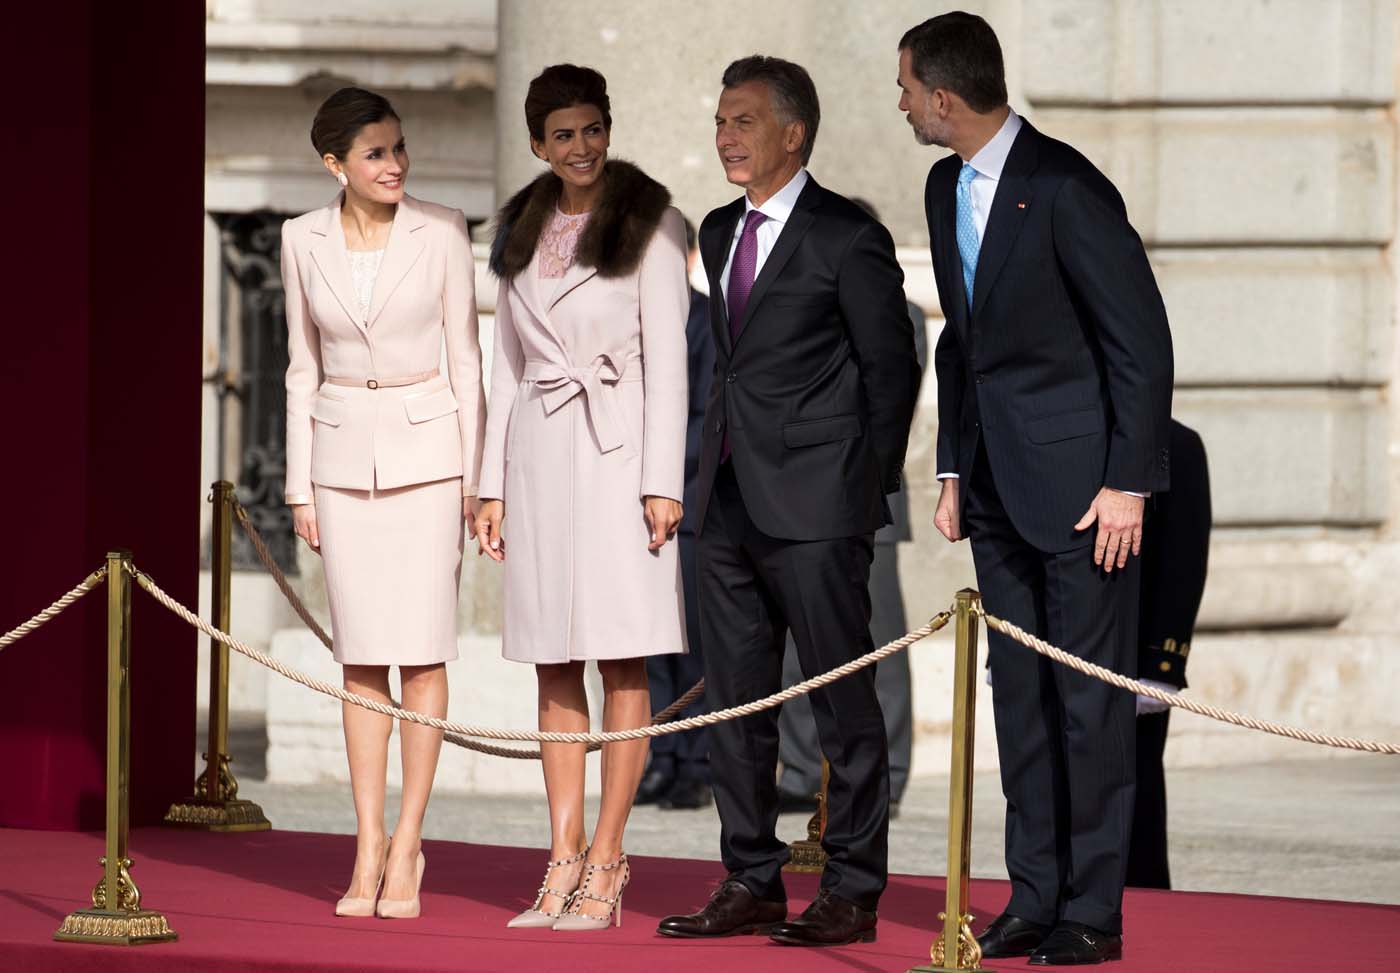 Spain's Queen Letizia, Argentina's first lady Juliana Awada, Argentina's President Mauricio Macri and Spain's King Felipe (L-R) talk before military parade during the welcoming ceremony at Royal Palace in Madrid, Spain February 22, 2017. REUTERS/Sergio Perez